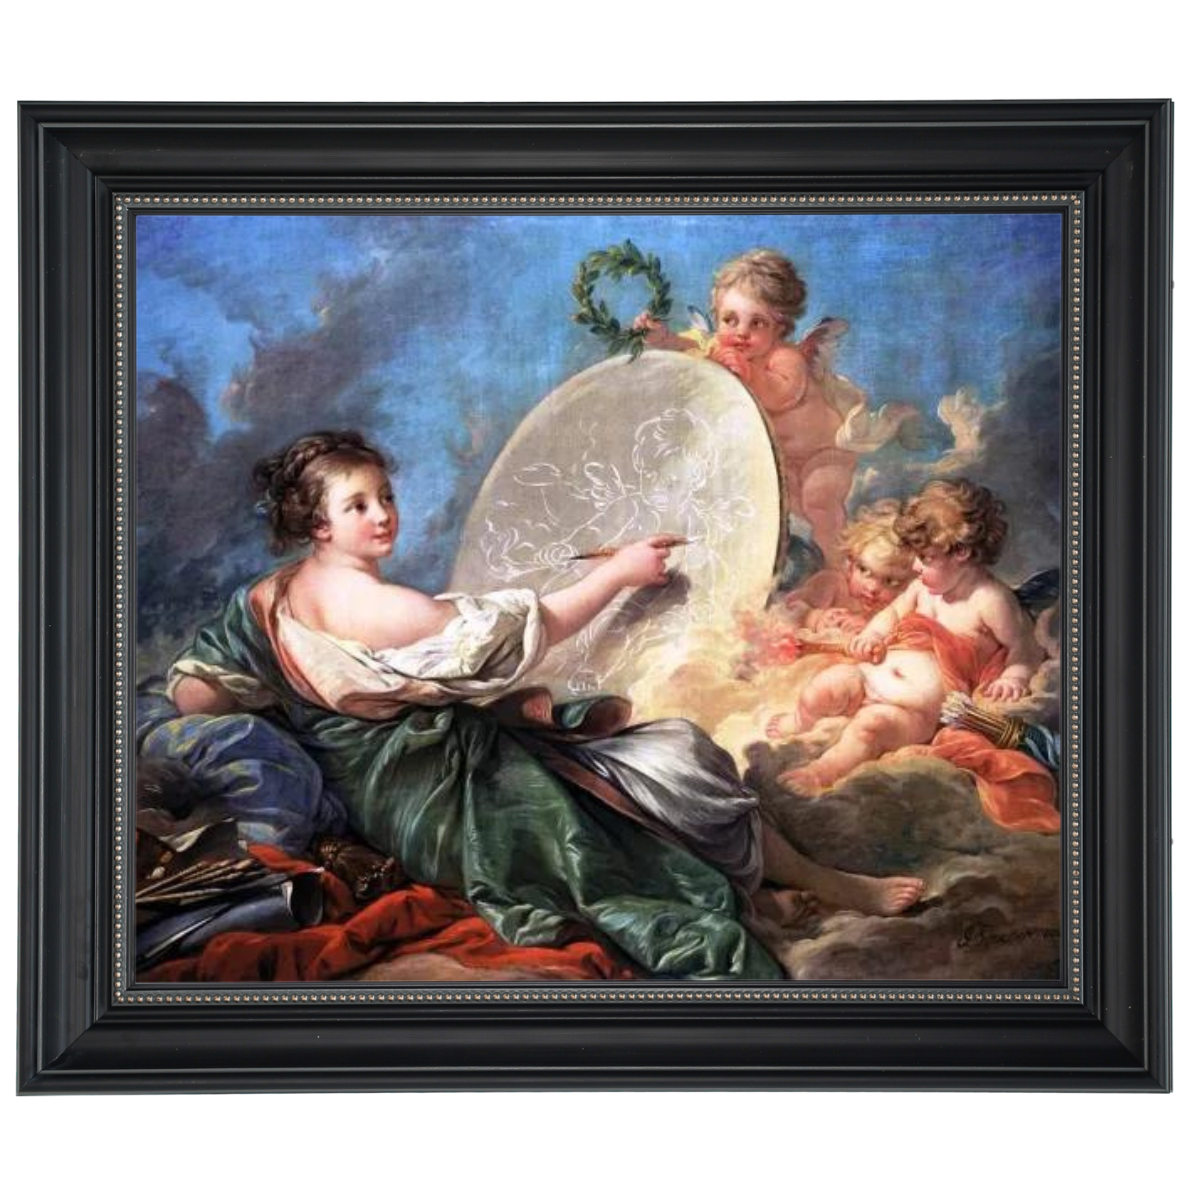 Allegory Of Painting - Vintage Wall Art Prints Decor For Living Room